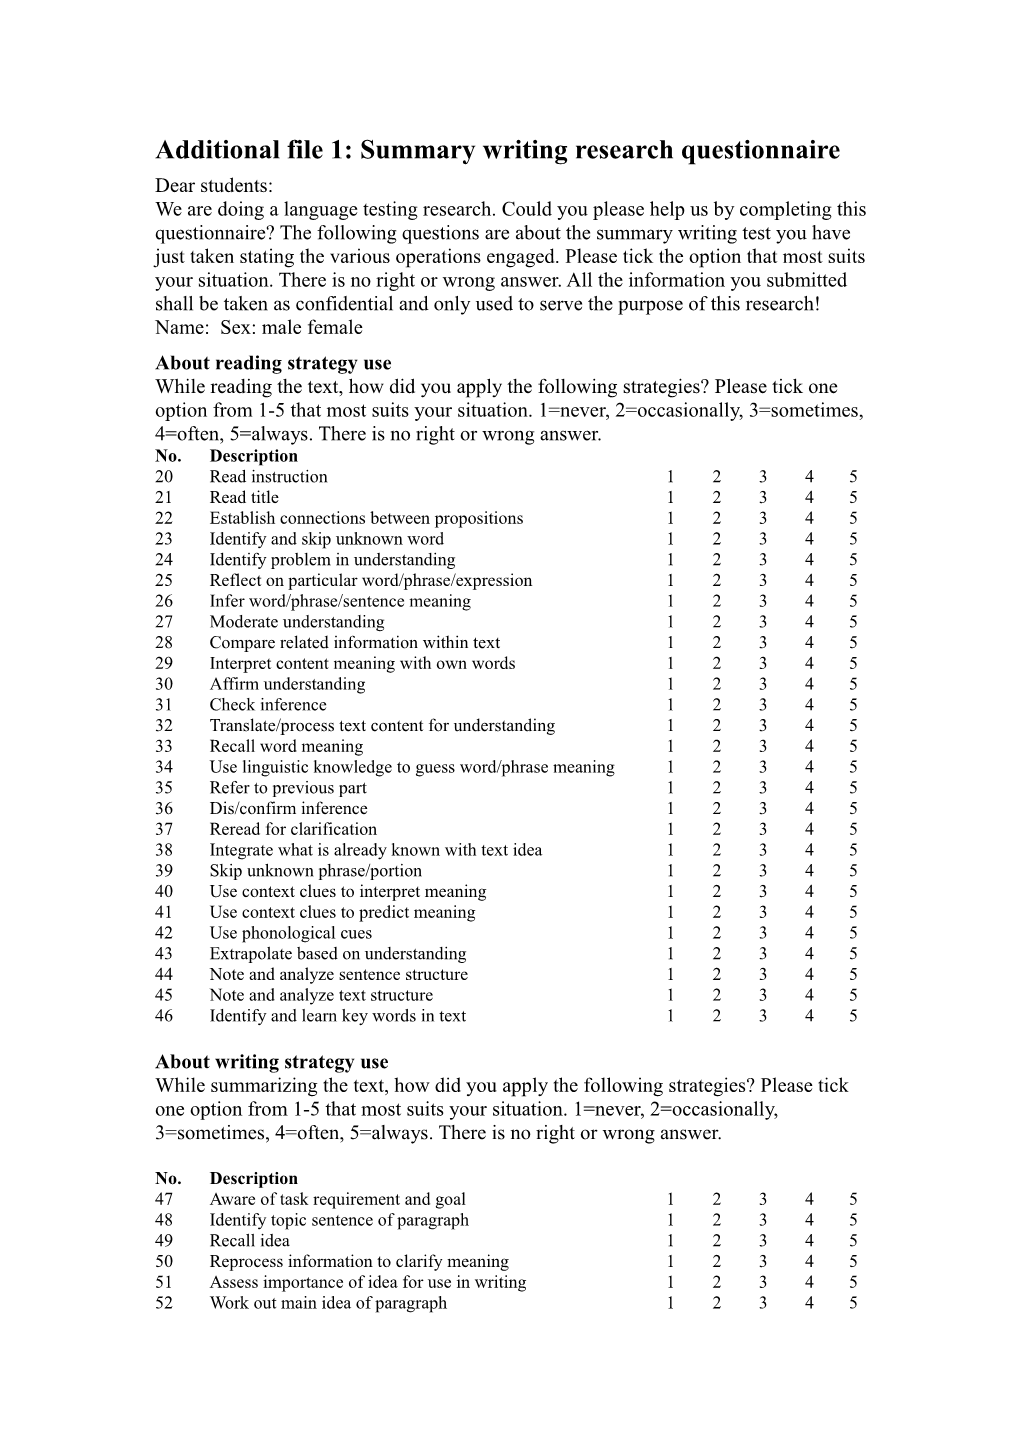 Additional File 1: Summary Writing Research Questionnaire